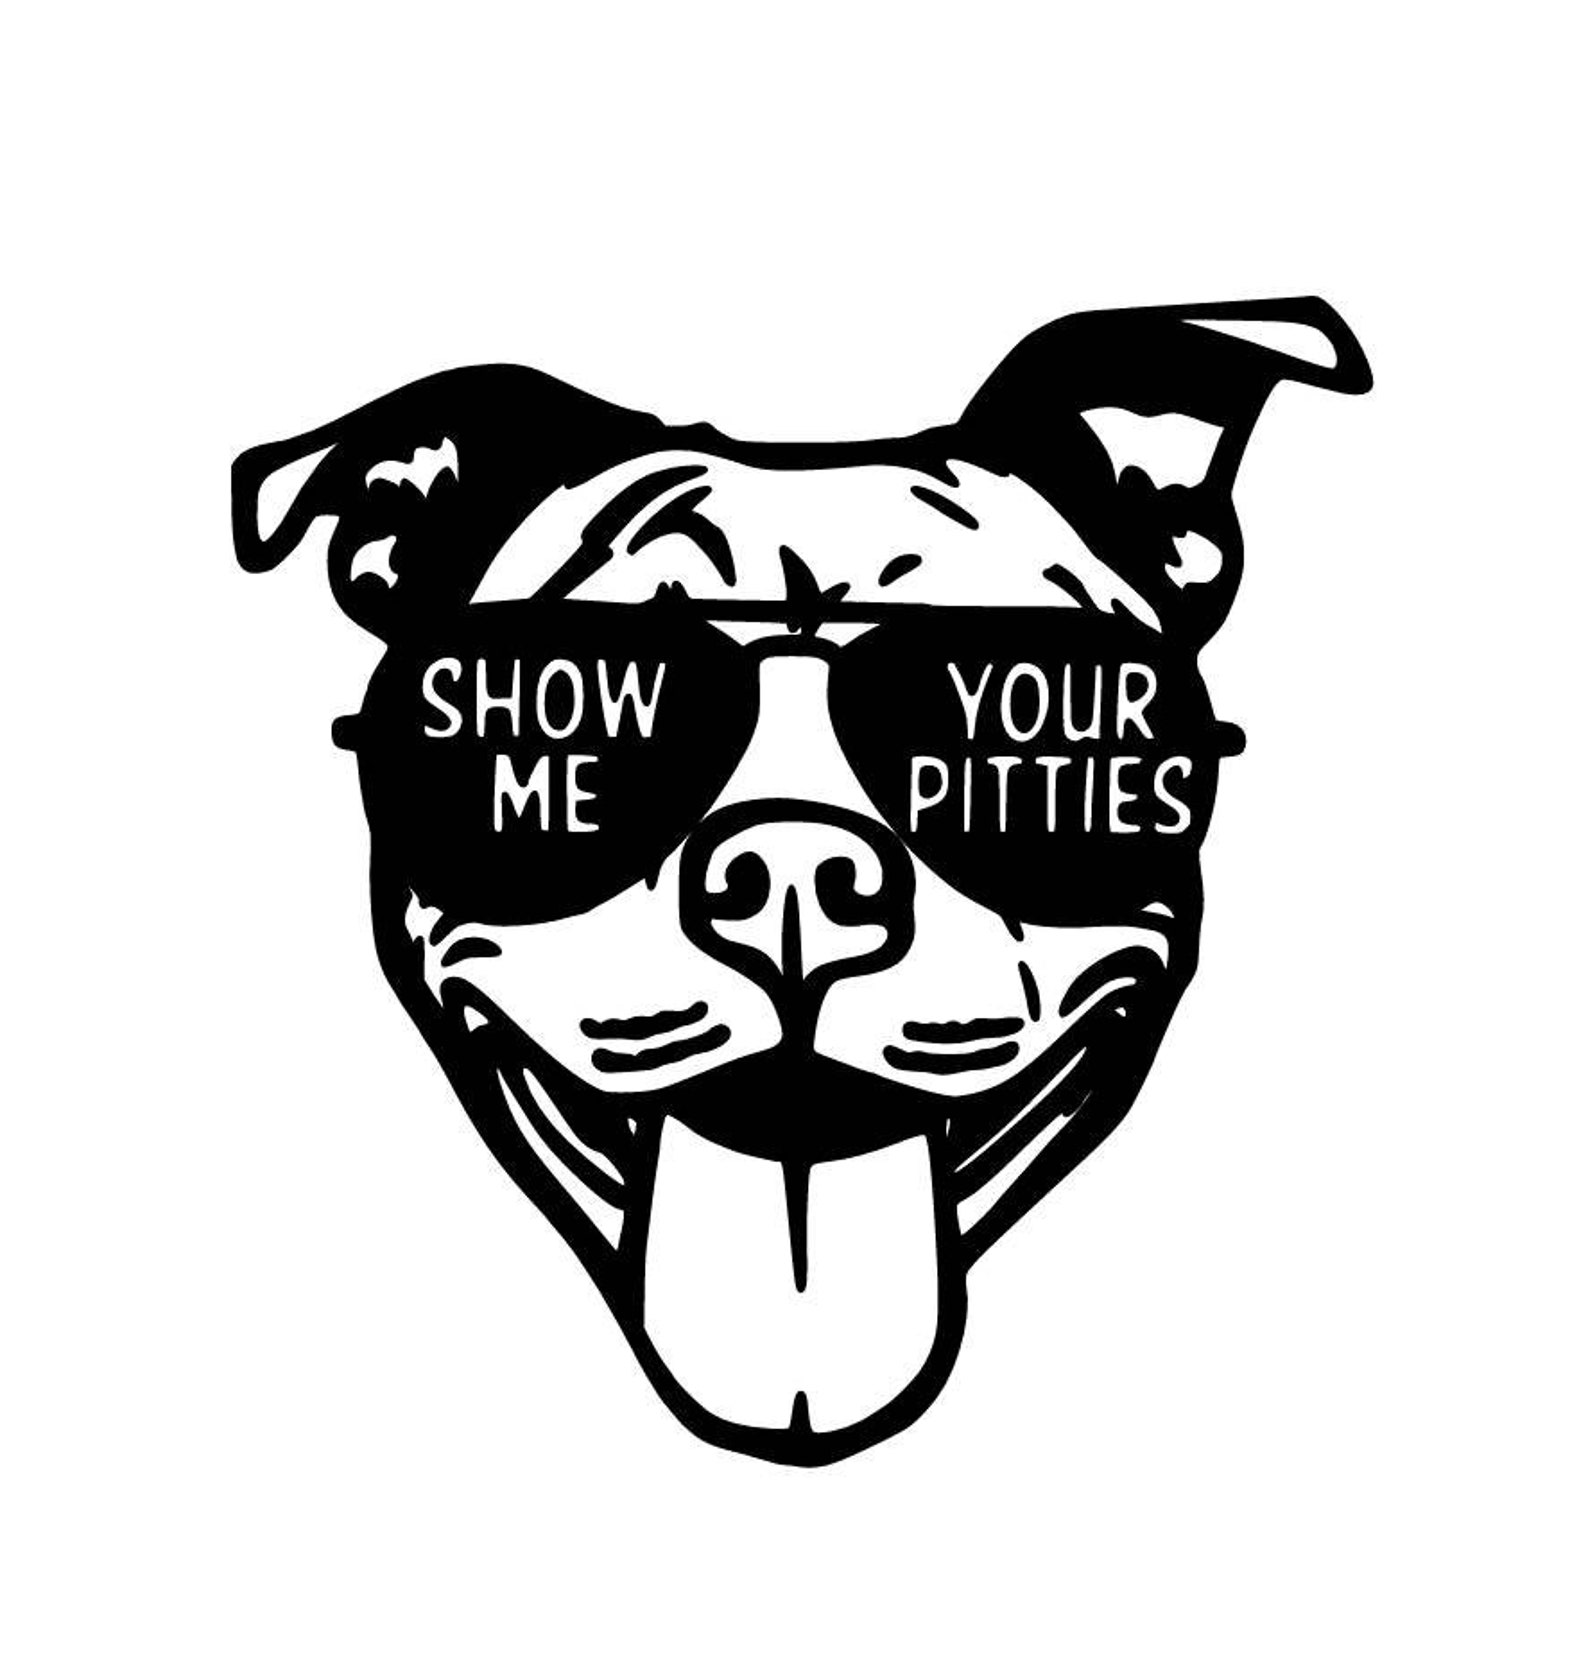 Show me your pitties decal pitbull.decal car decal funny | Etsy